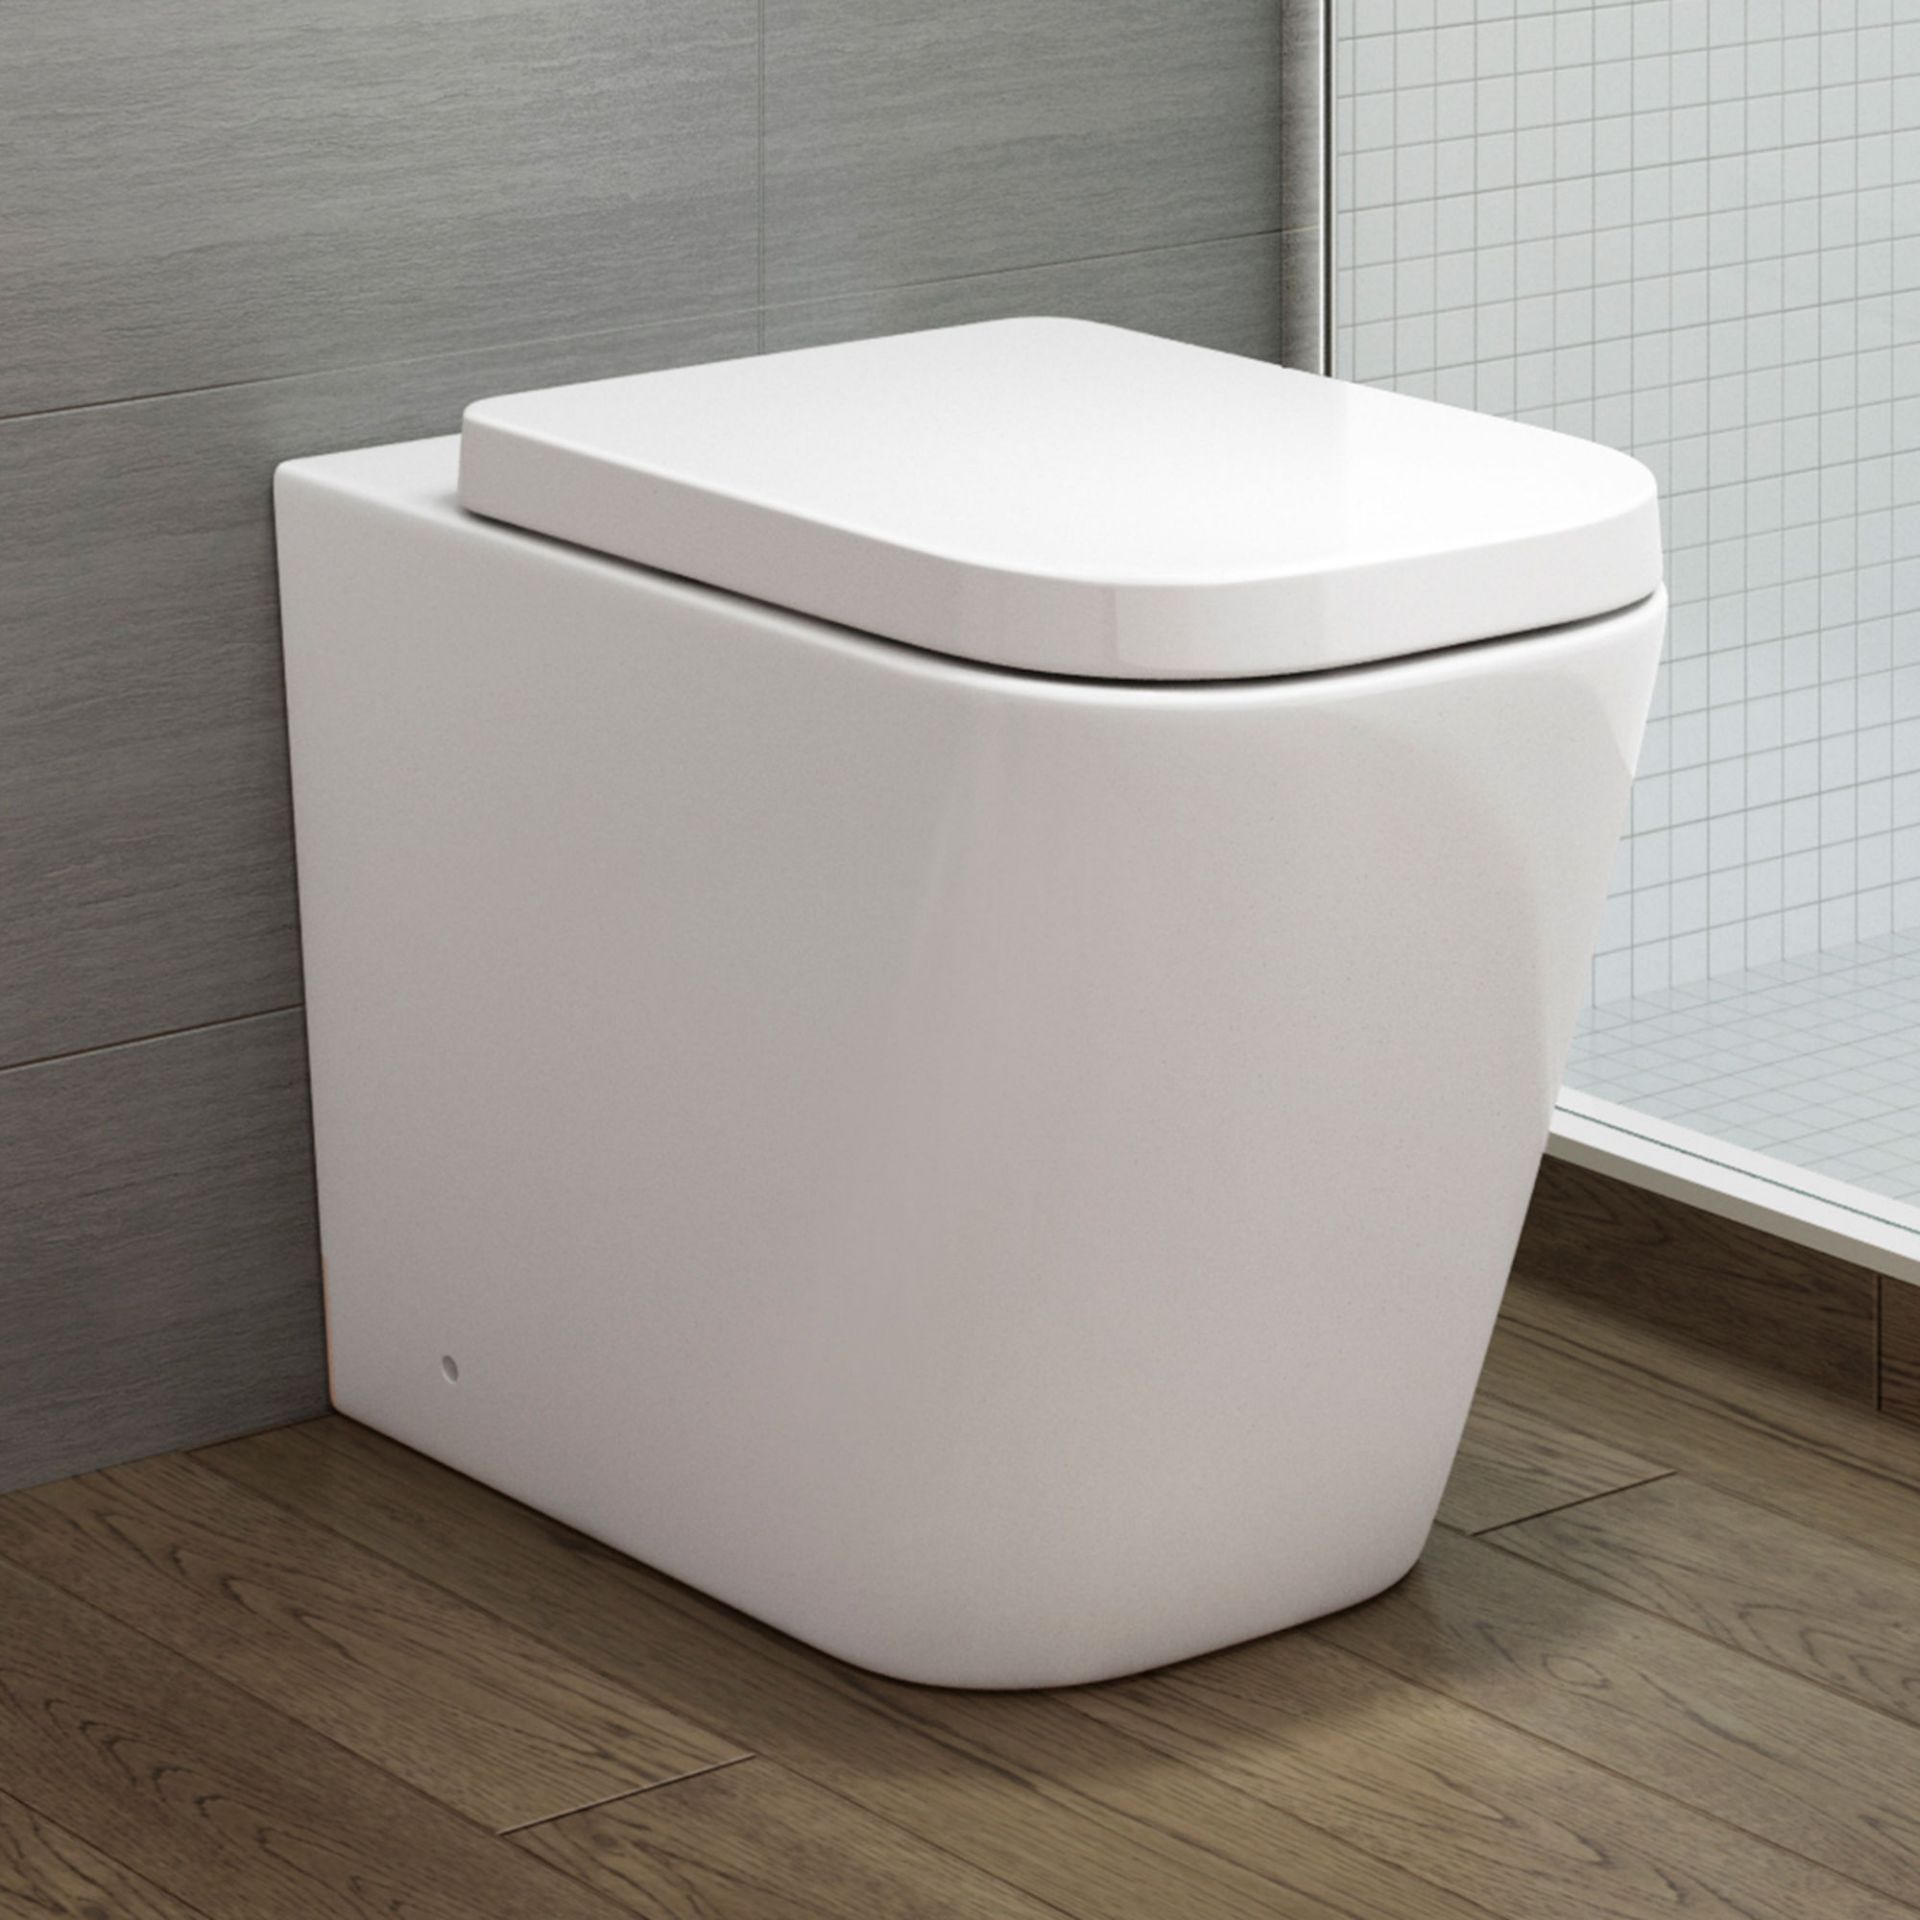 Florence Rimless Back to Wall Toilet inc Luxury Soft Close Seat. Rimless design makes it easy t... - Image 3 of 3